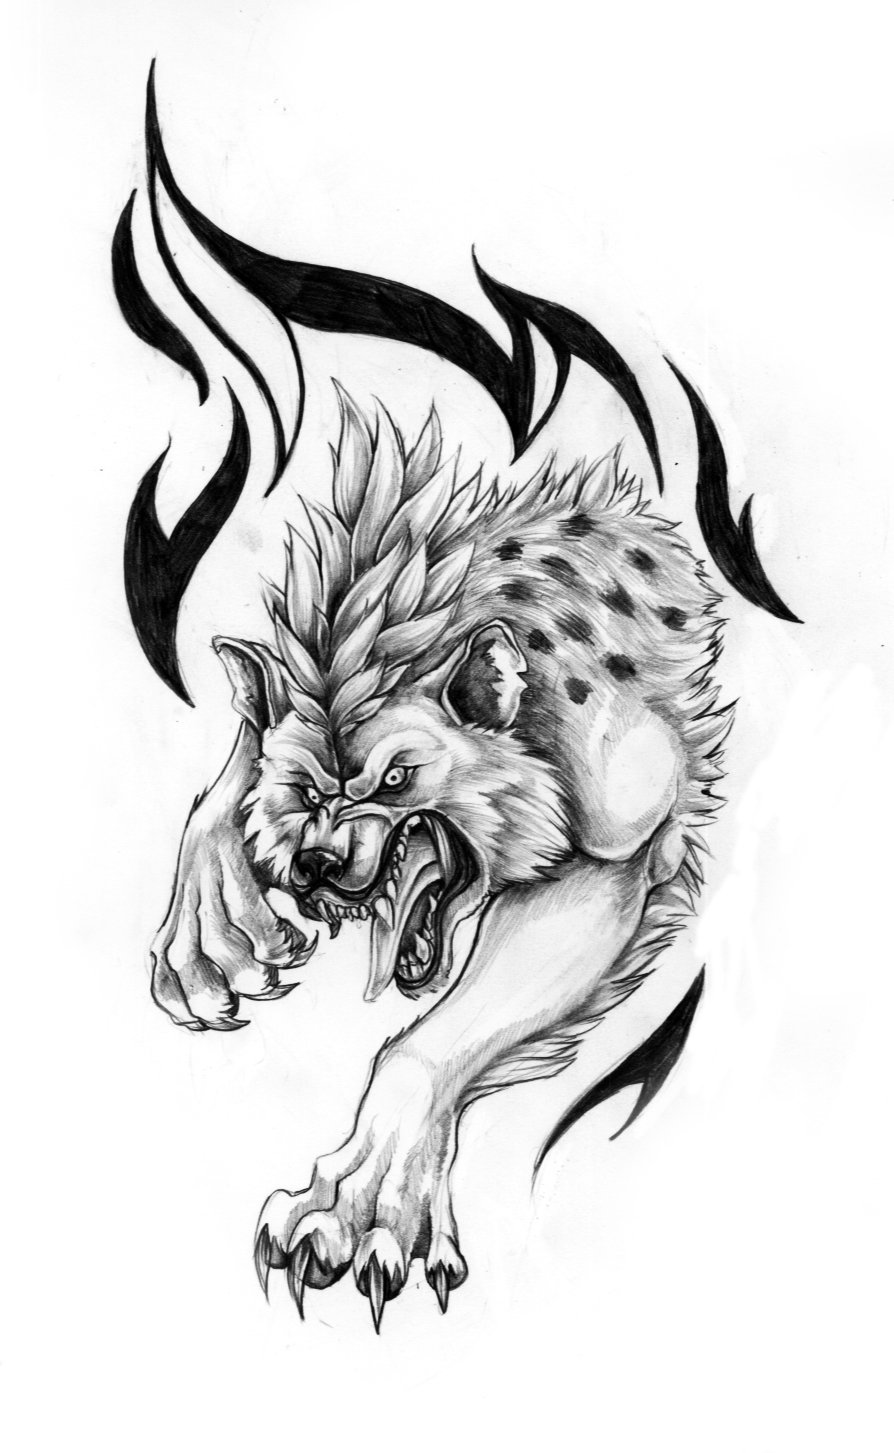 Read Complete 14 Awesome Hyena Tattoo Designs